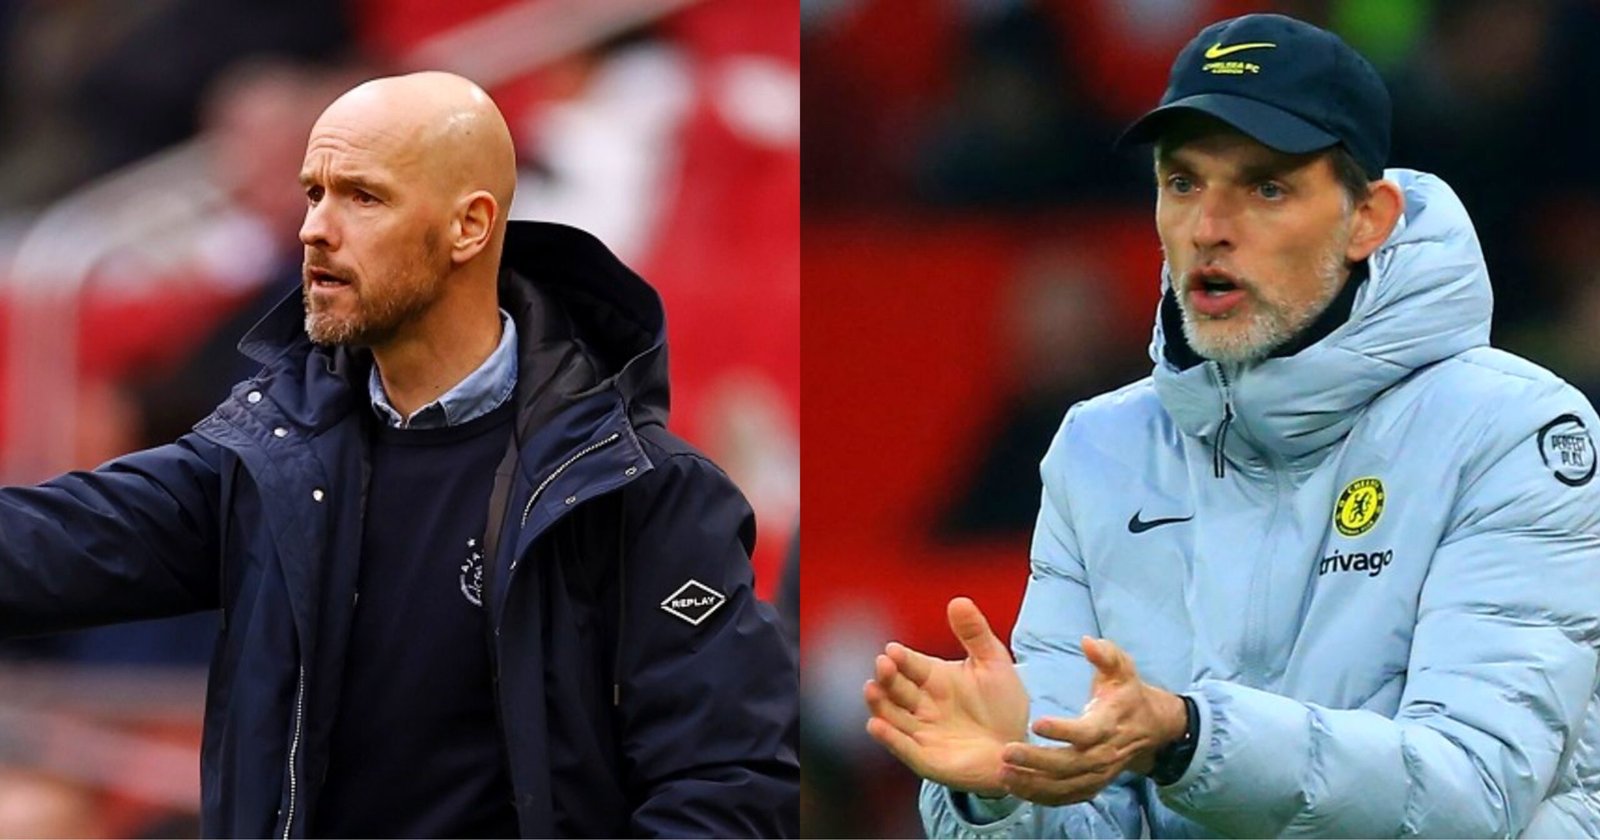 Thomas Tuchel Expects Manchester United To Recover Under Erik ten Hag - Latest Football News and Updates